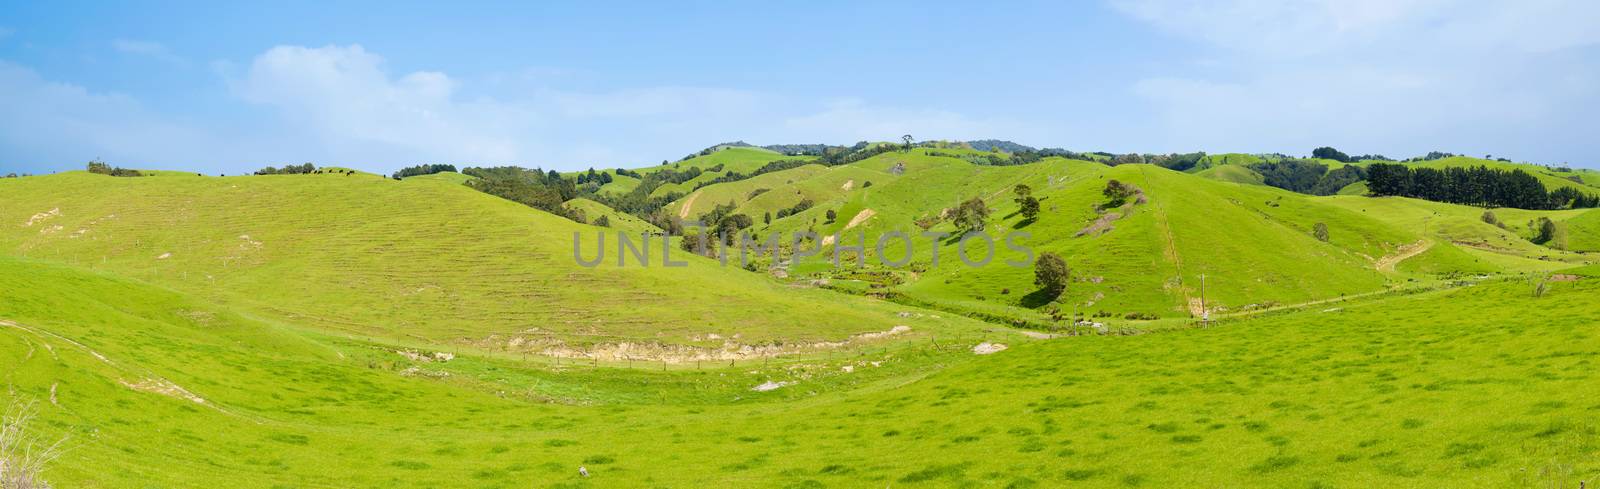 Common view in the New Zealand - hills covered by green grass. Panoramic photo